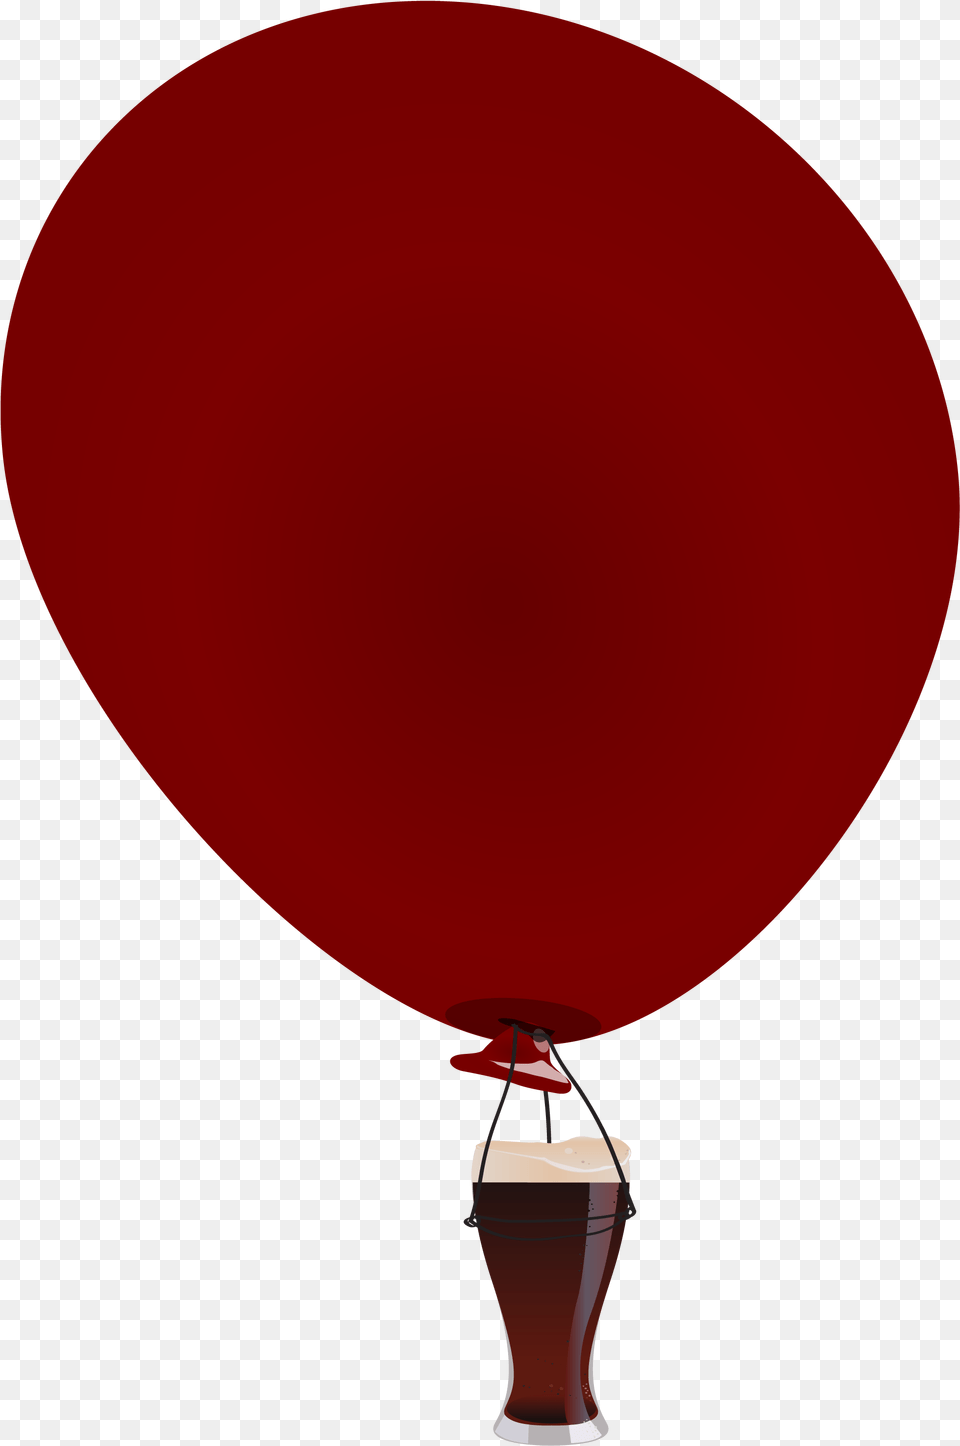 Leave A Reply Cancel Reply Black Metal, Balloon, Aircraft, Transportation, Vehicle Png Image